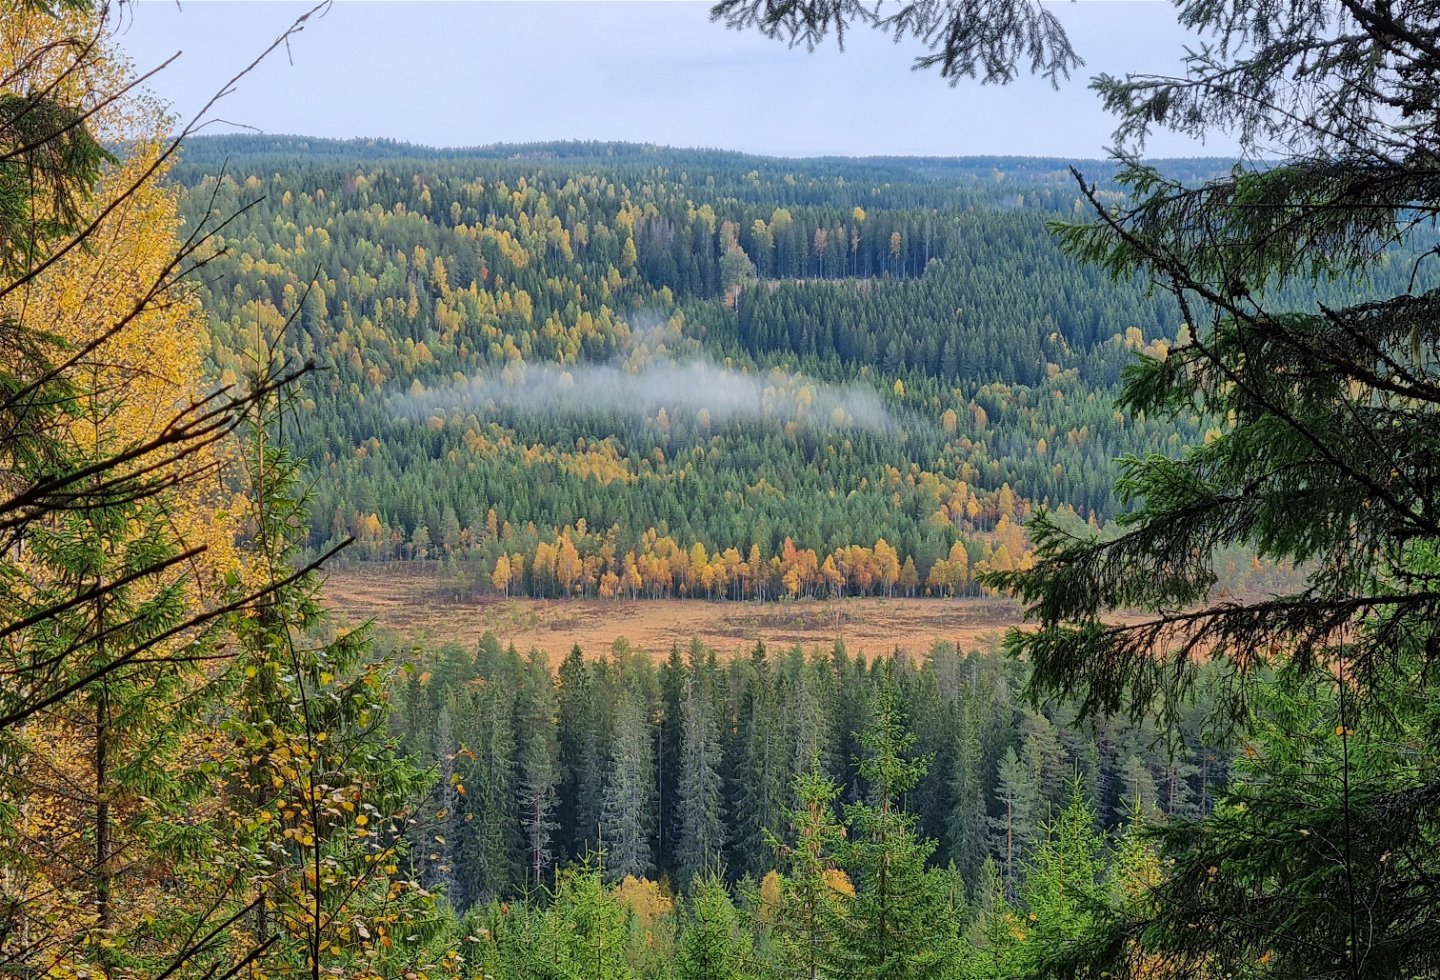 Vast view of coniferous forest and mires.